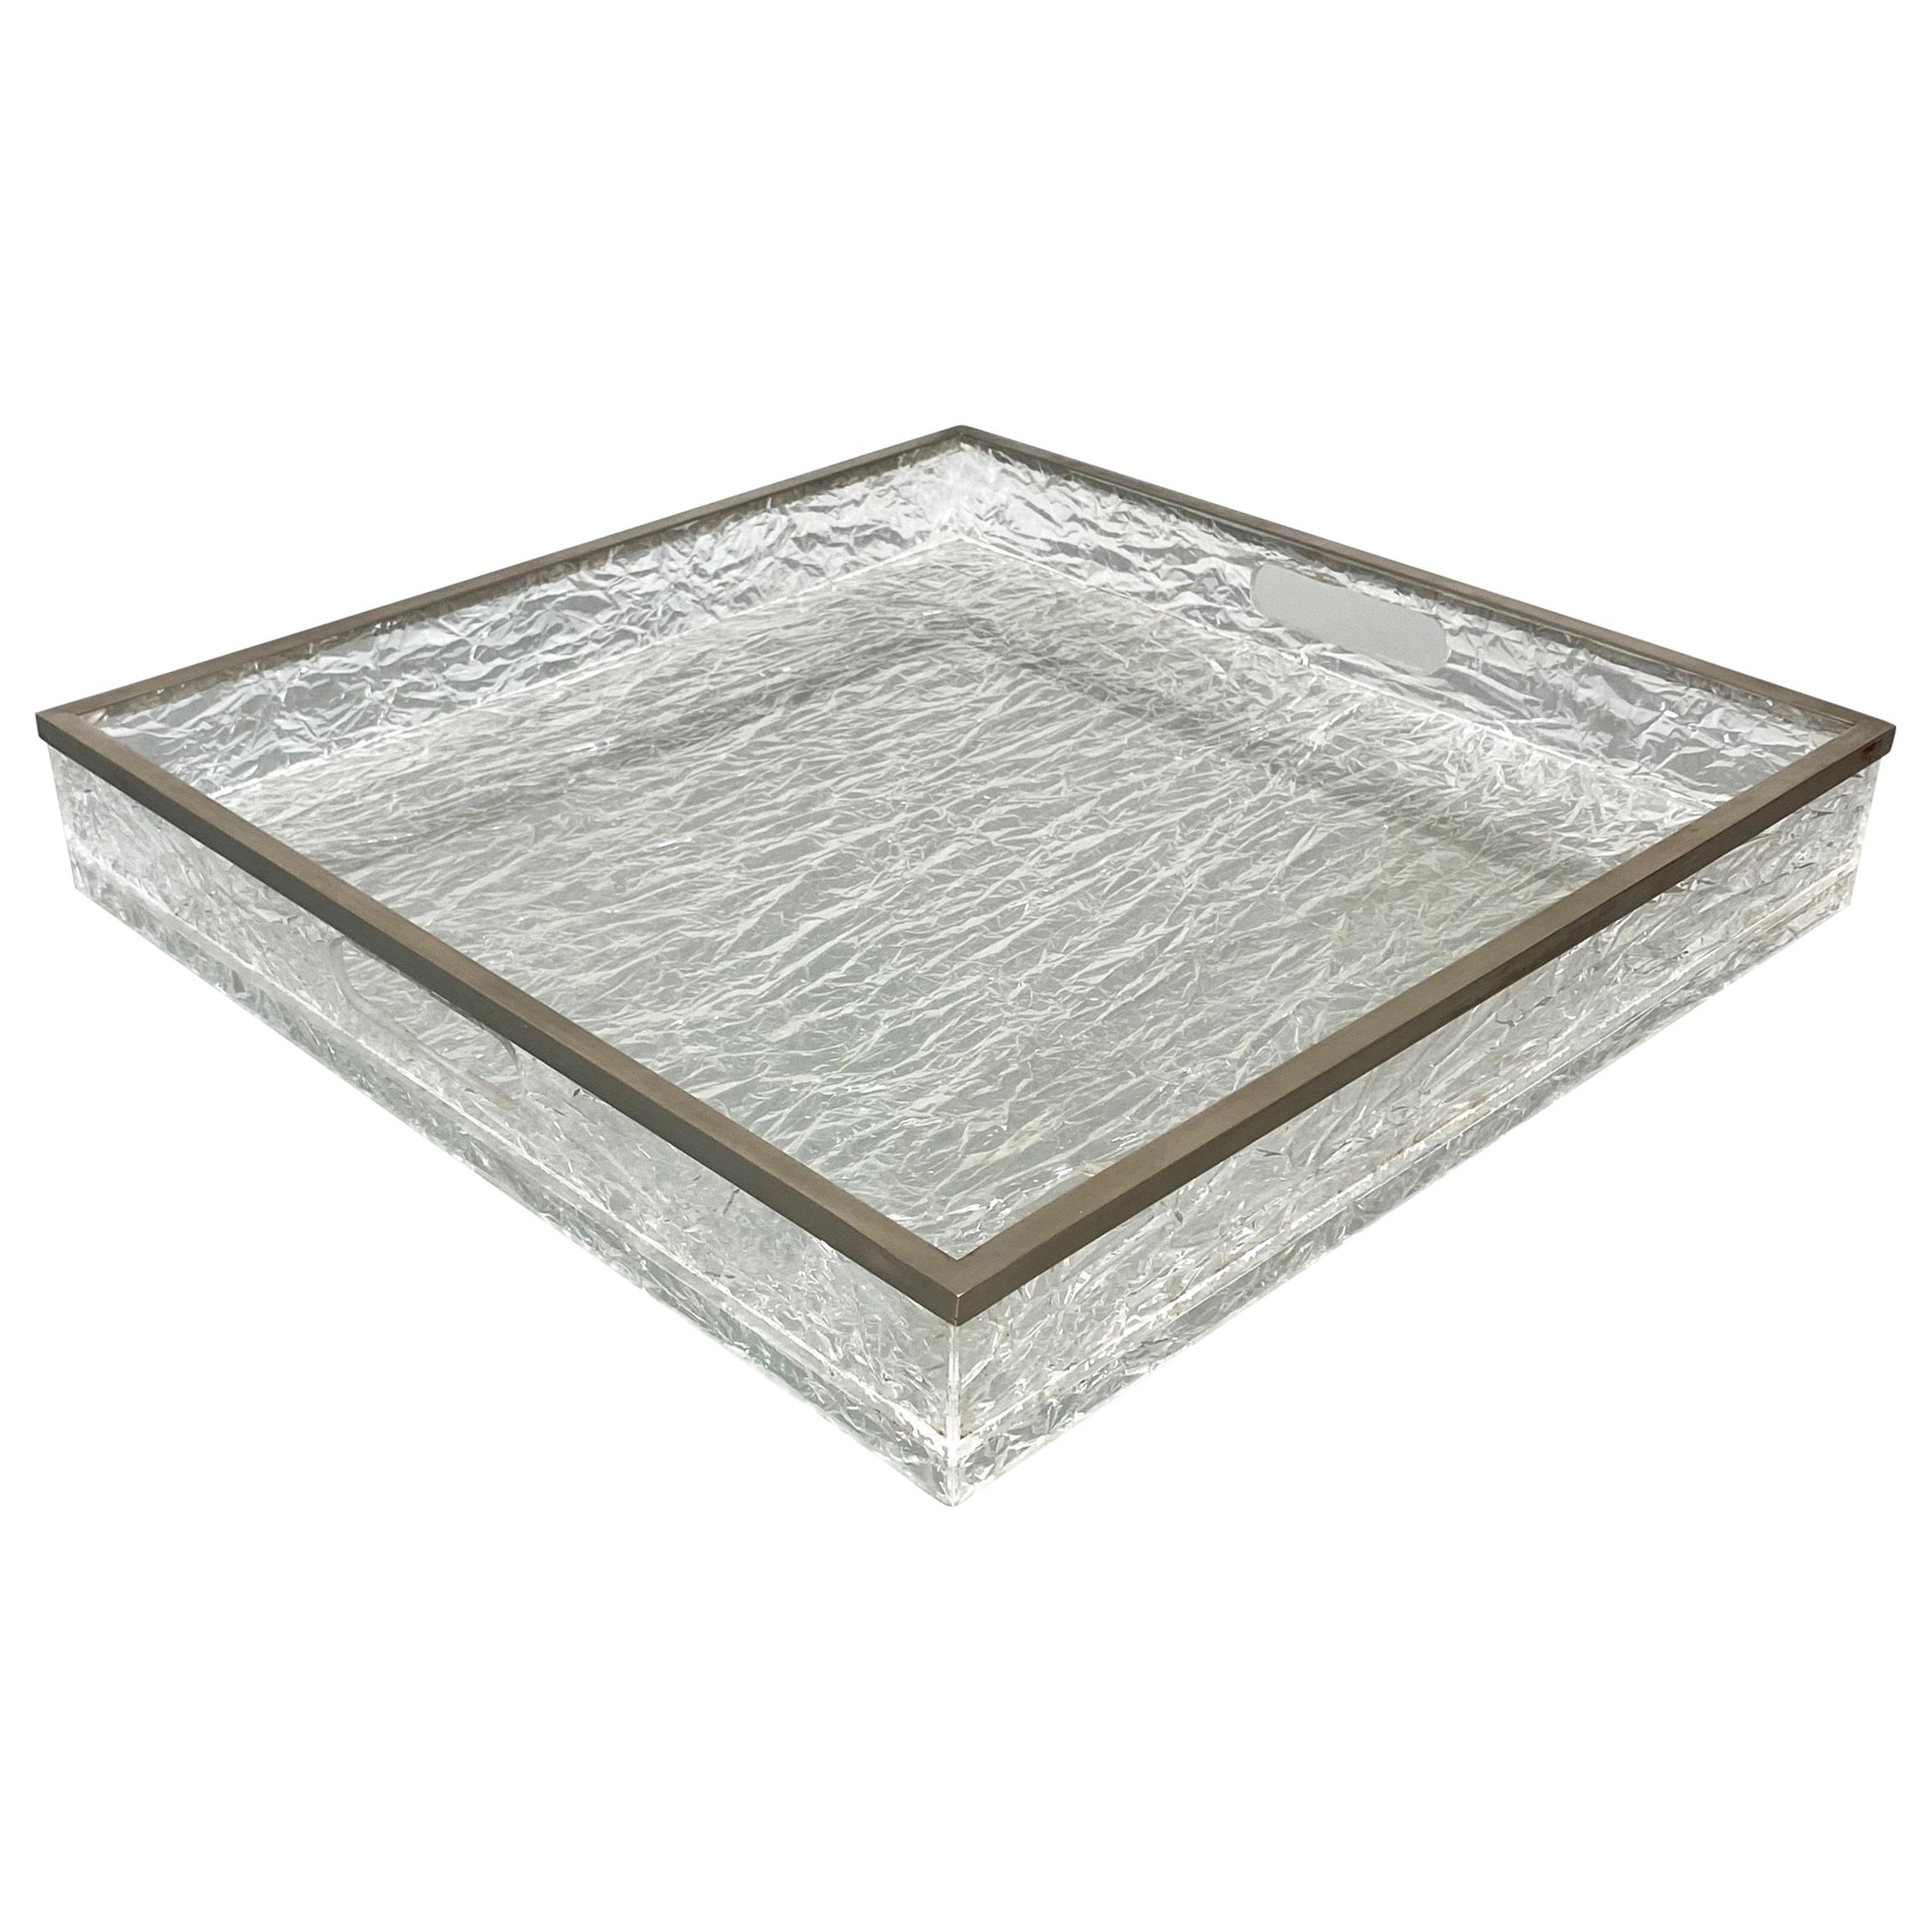 Centerpiece Serving Tray Ice Effect Lucite Nickel Willy Rizzo, Italy, 1970s